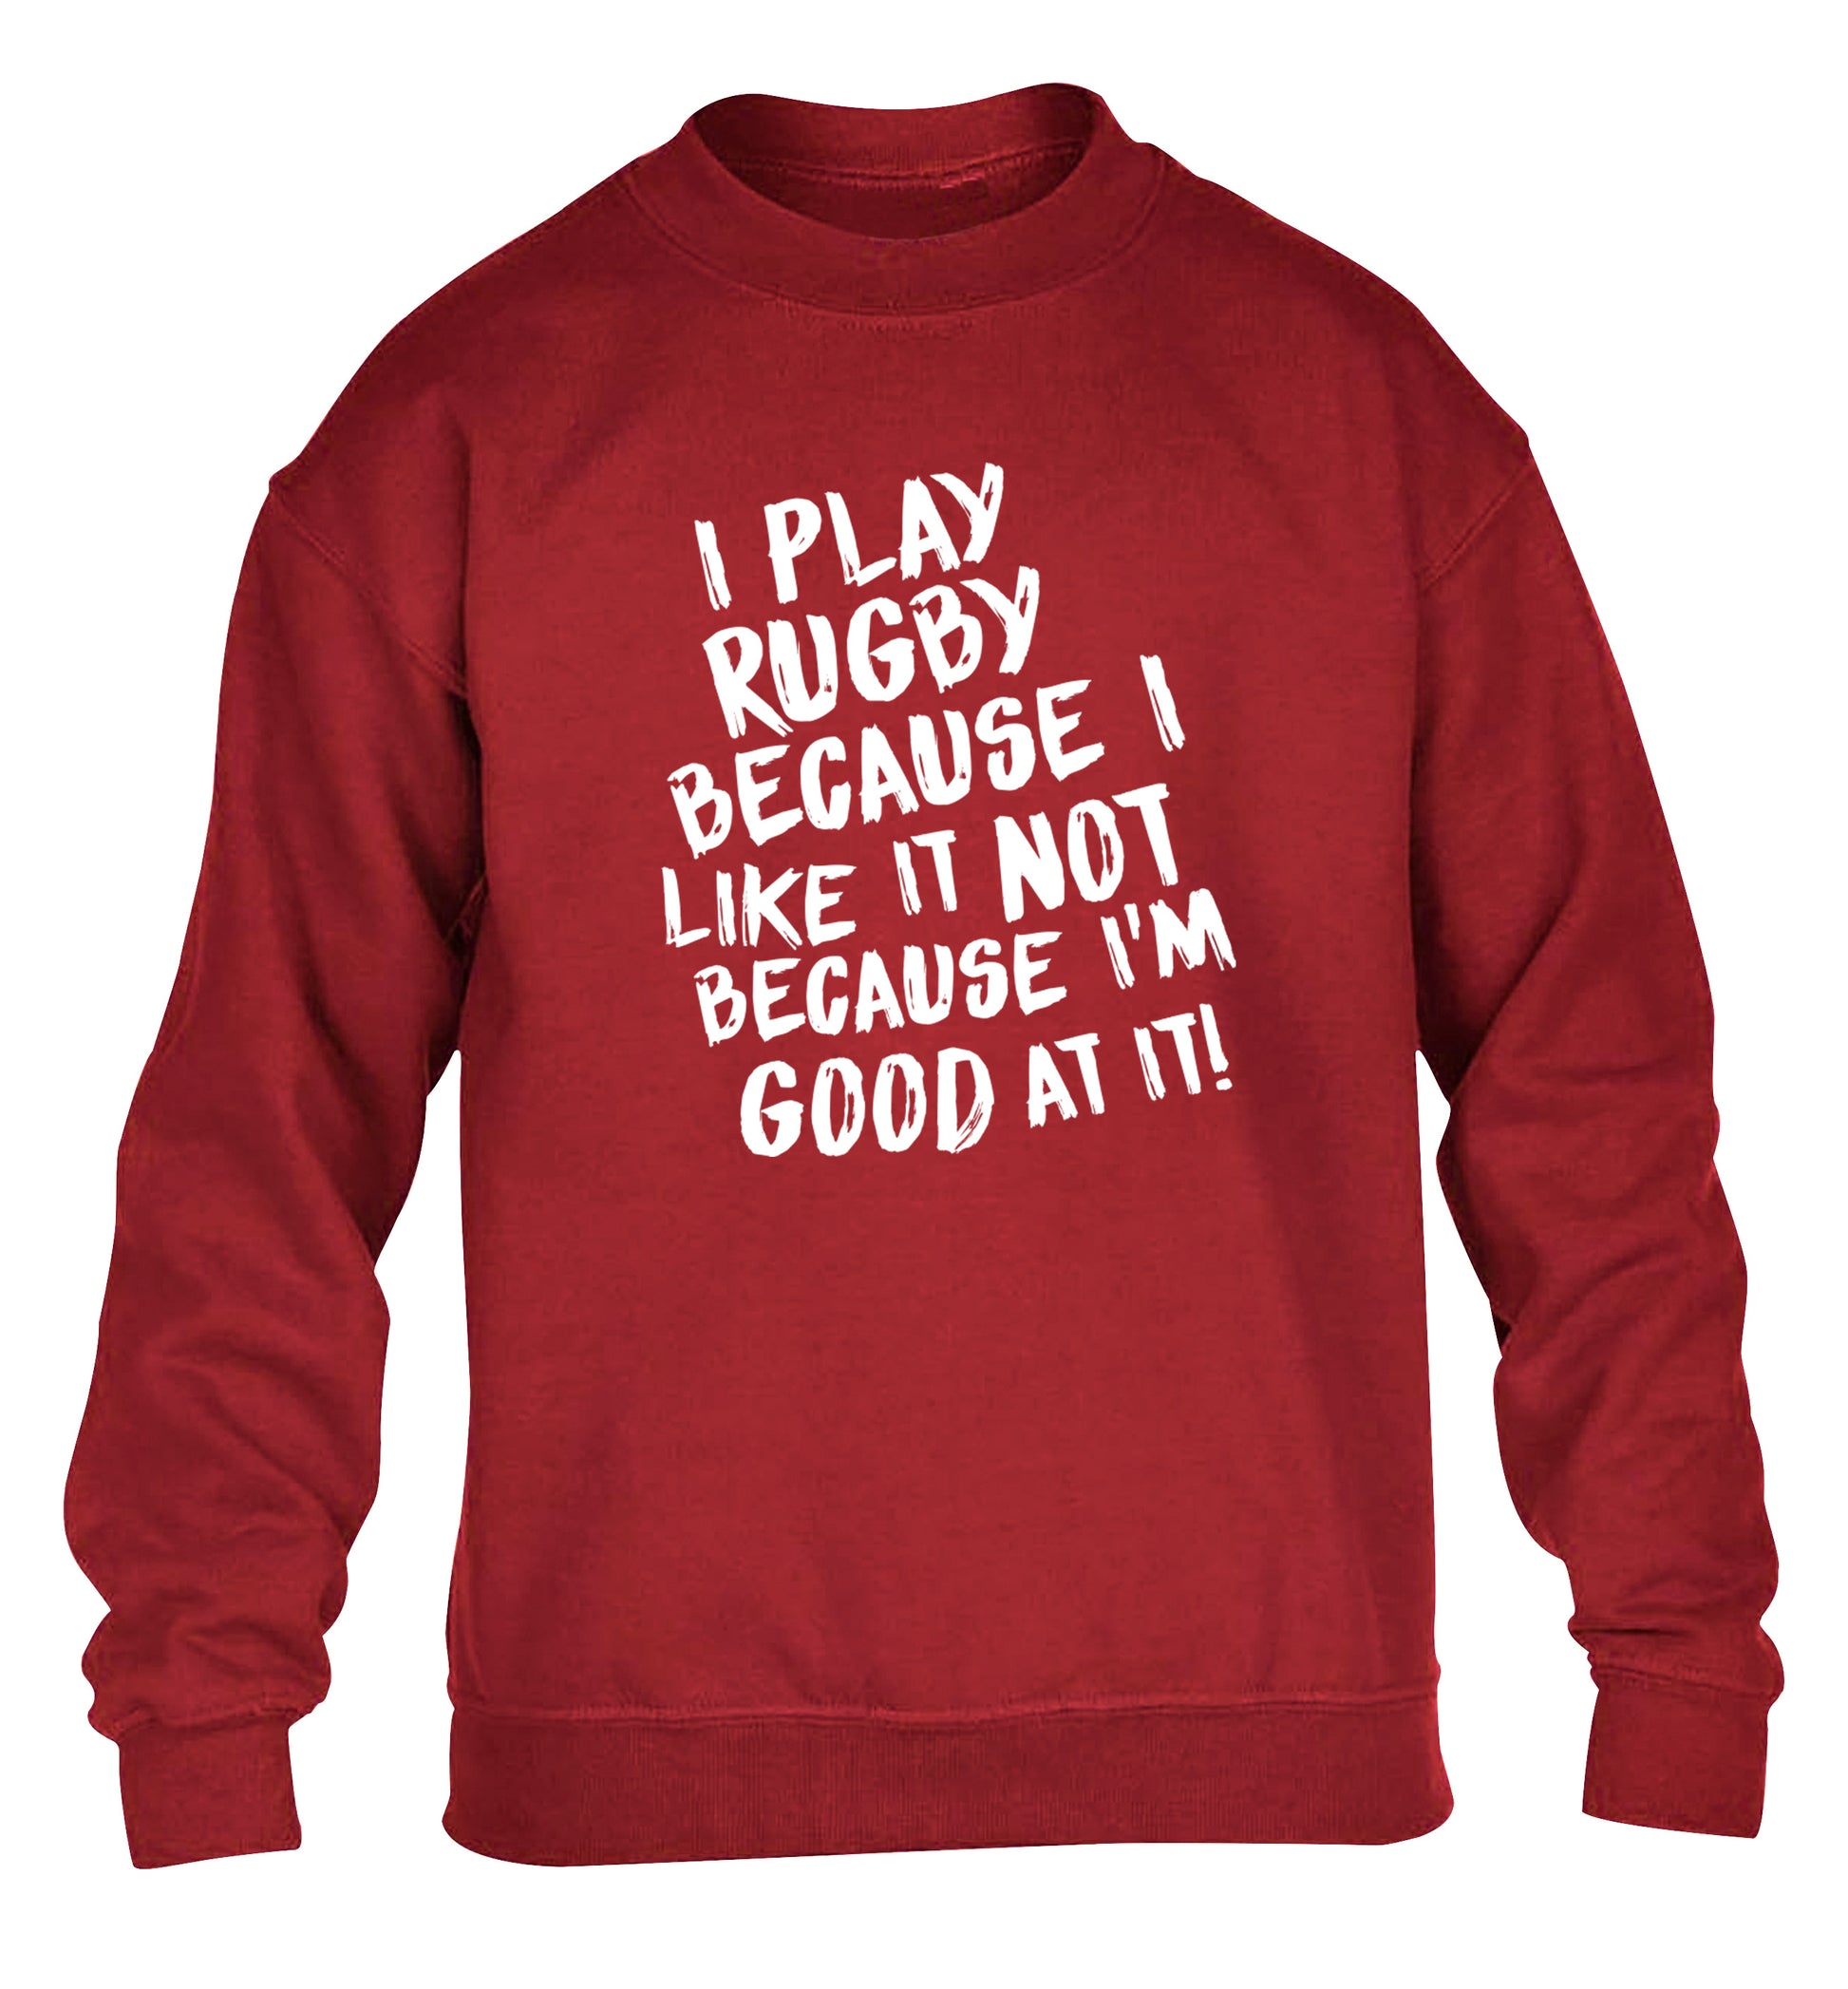 I play rugby because I like it not because I'm good at it children's grey sweater 12-13 Years